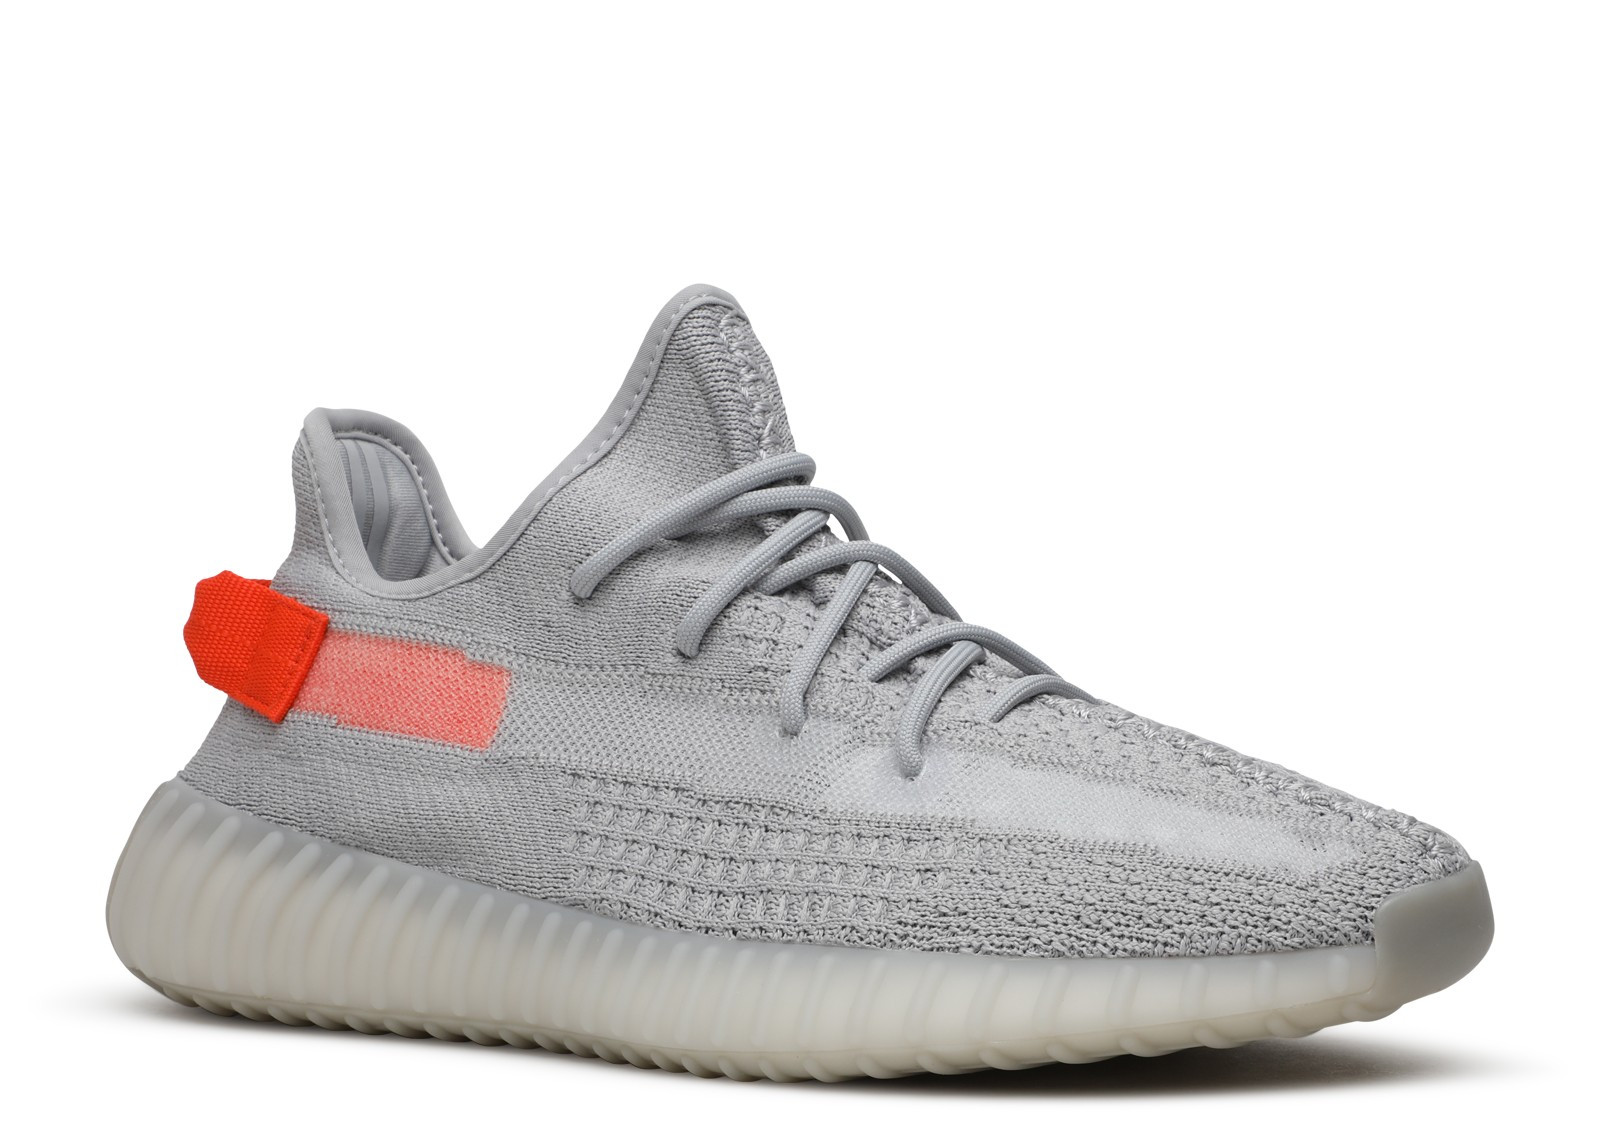 YEEZY BOOST 350 V2 TAIL LIGHT | Level Up